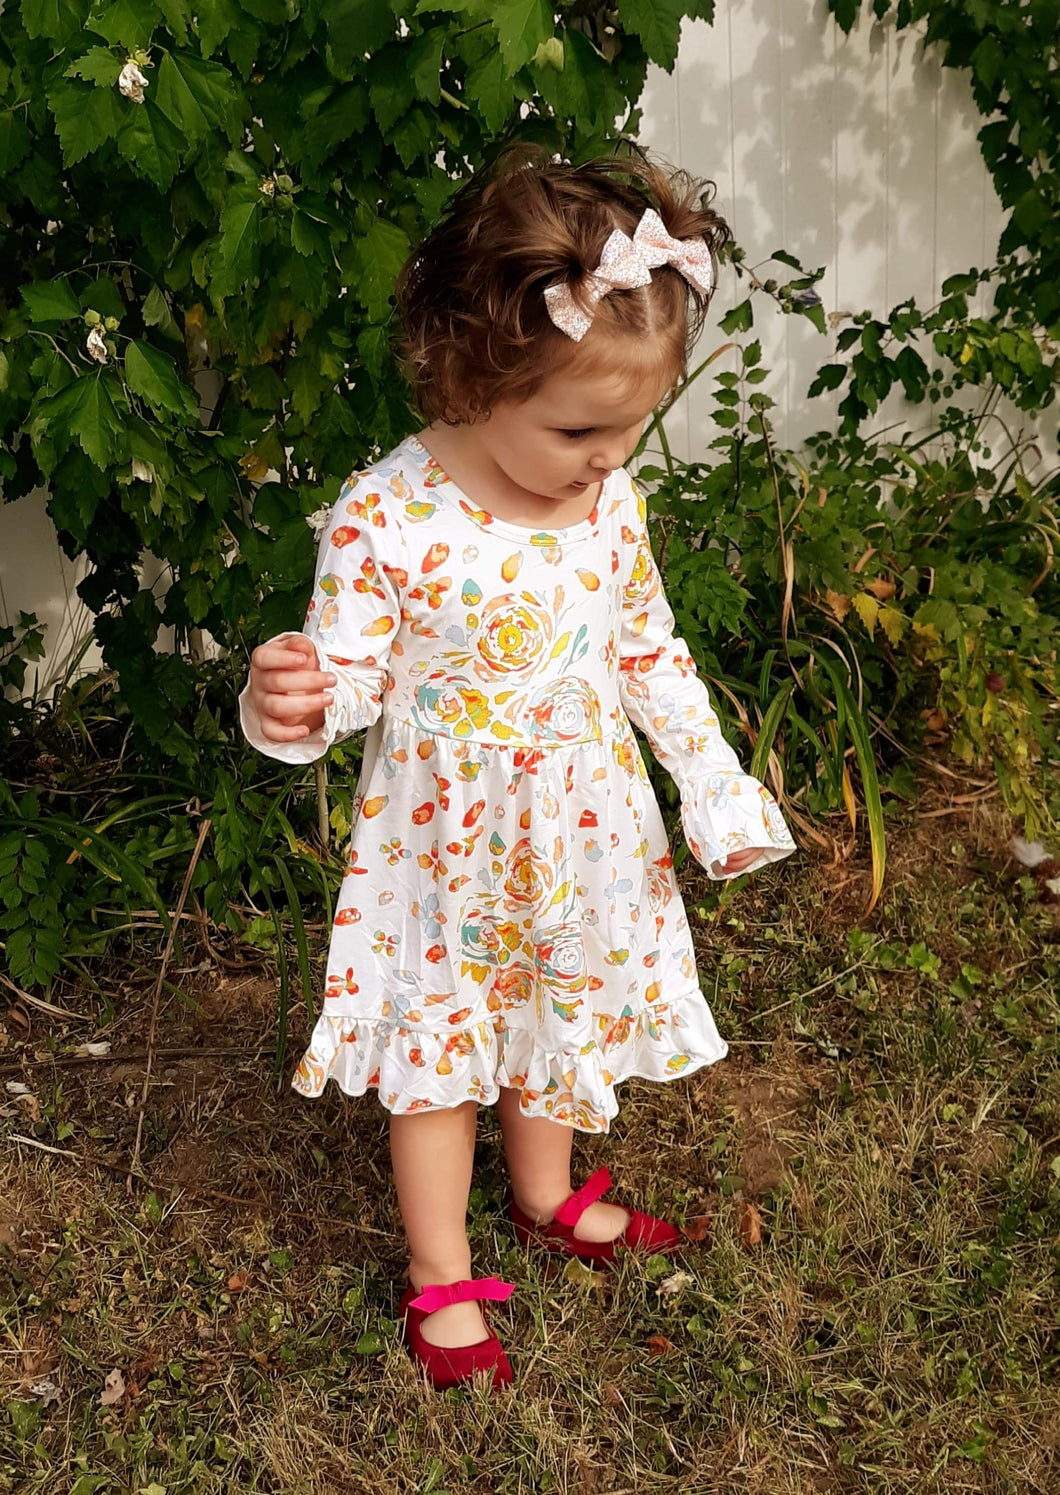 Floral dress - You Are My Sunshine Boutique LLC